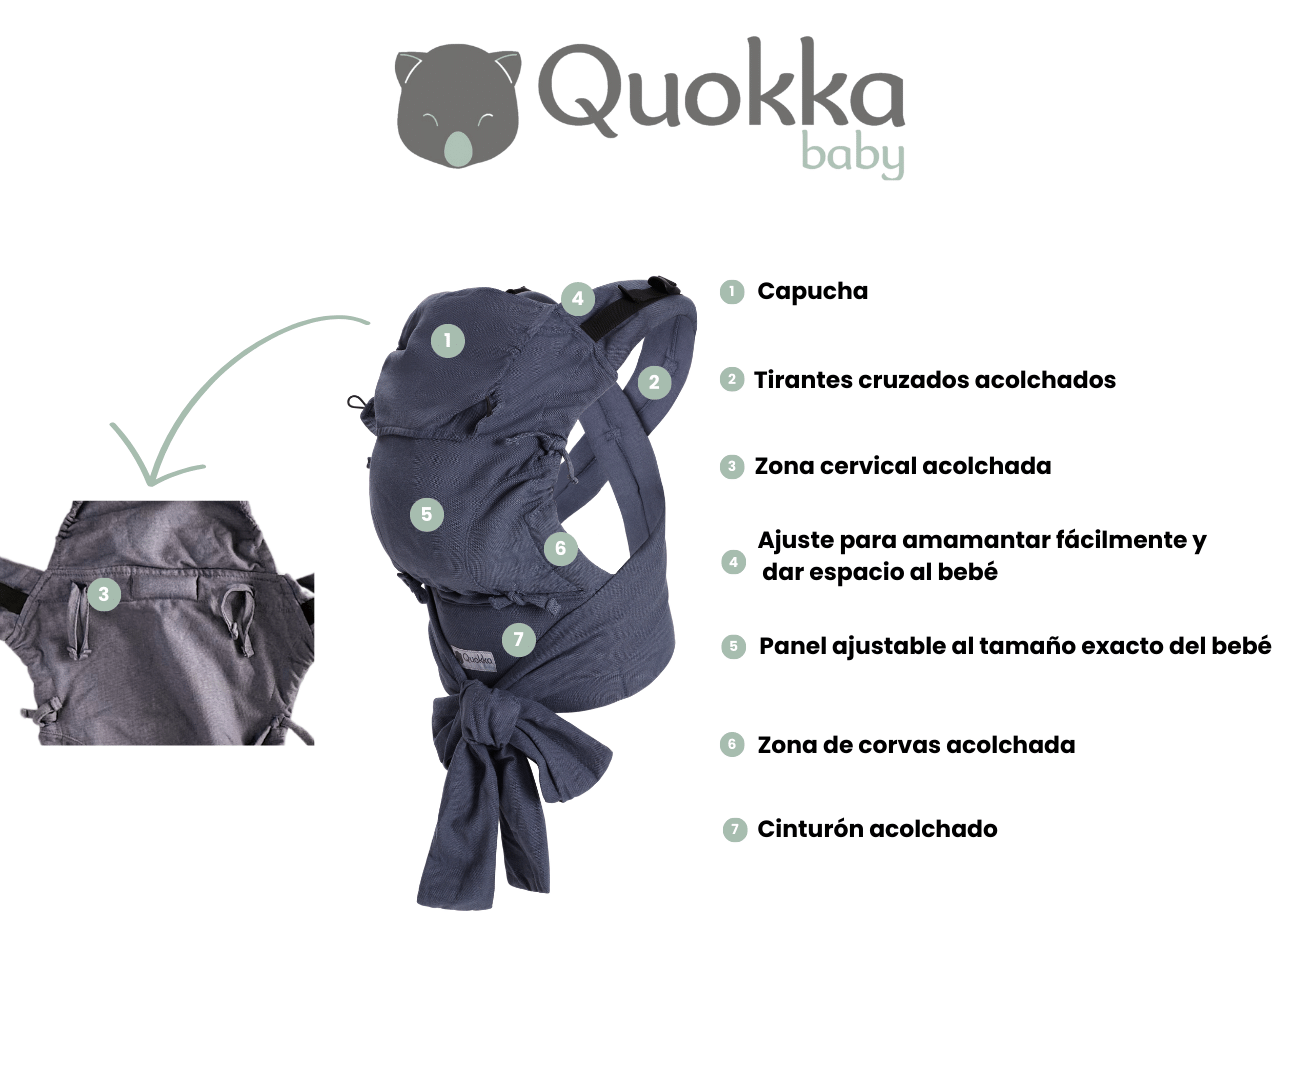 Characteristics of the Quokkababy E carrier ergonomic carrying backpack in which the technical characteristics detailed